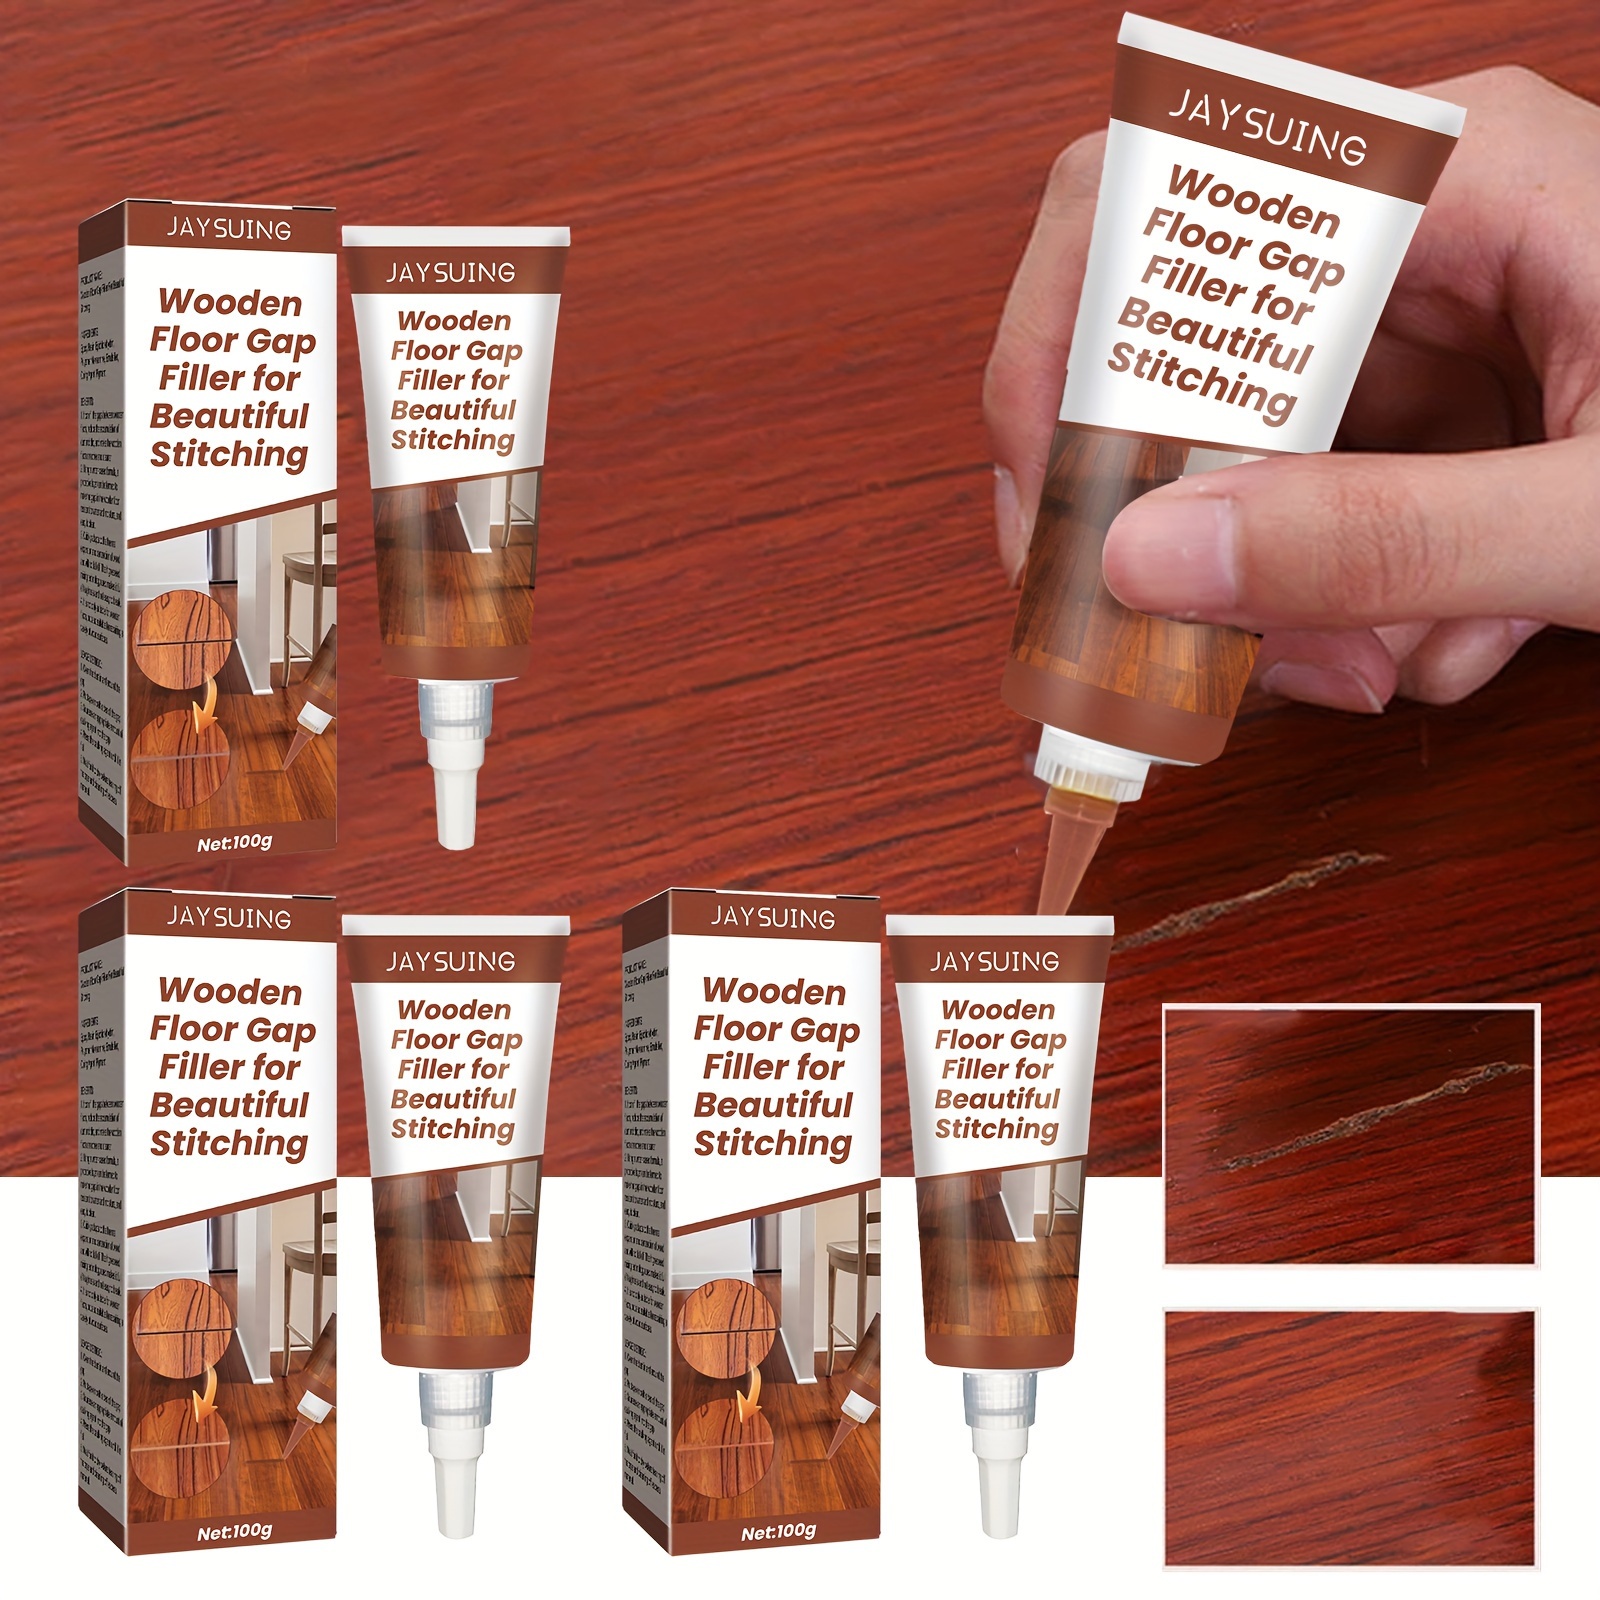 13PCS Furniture Touch Up Kit Markers & Filler Stick Wood Scratches Restore  Kit Scratch Patch Paint Pen for Hardwood Wooden Floor